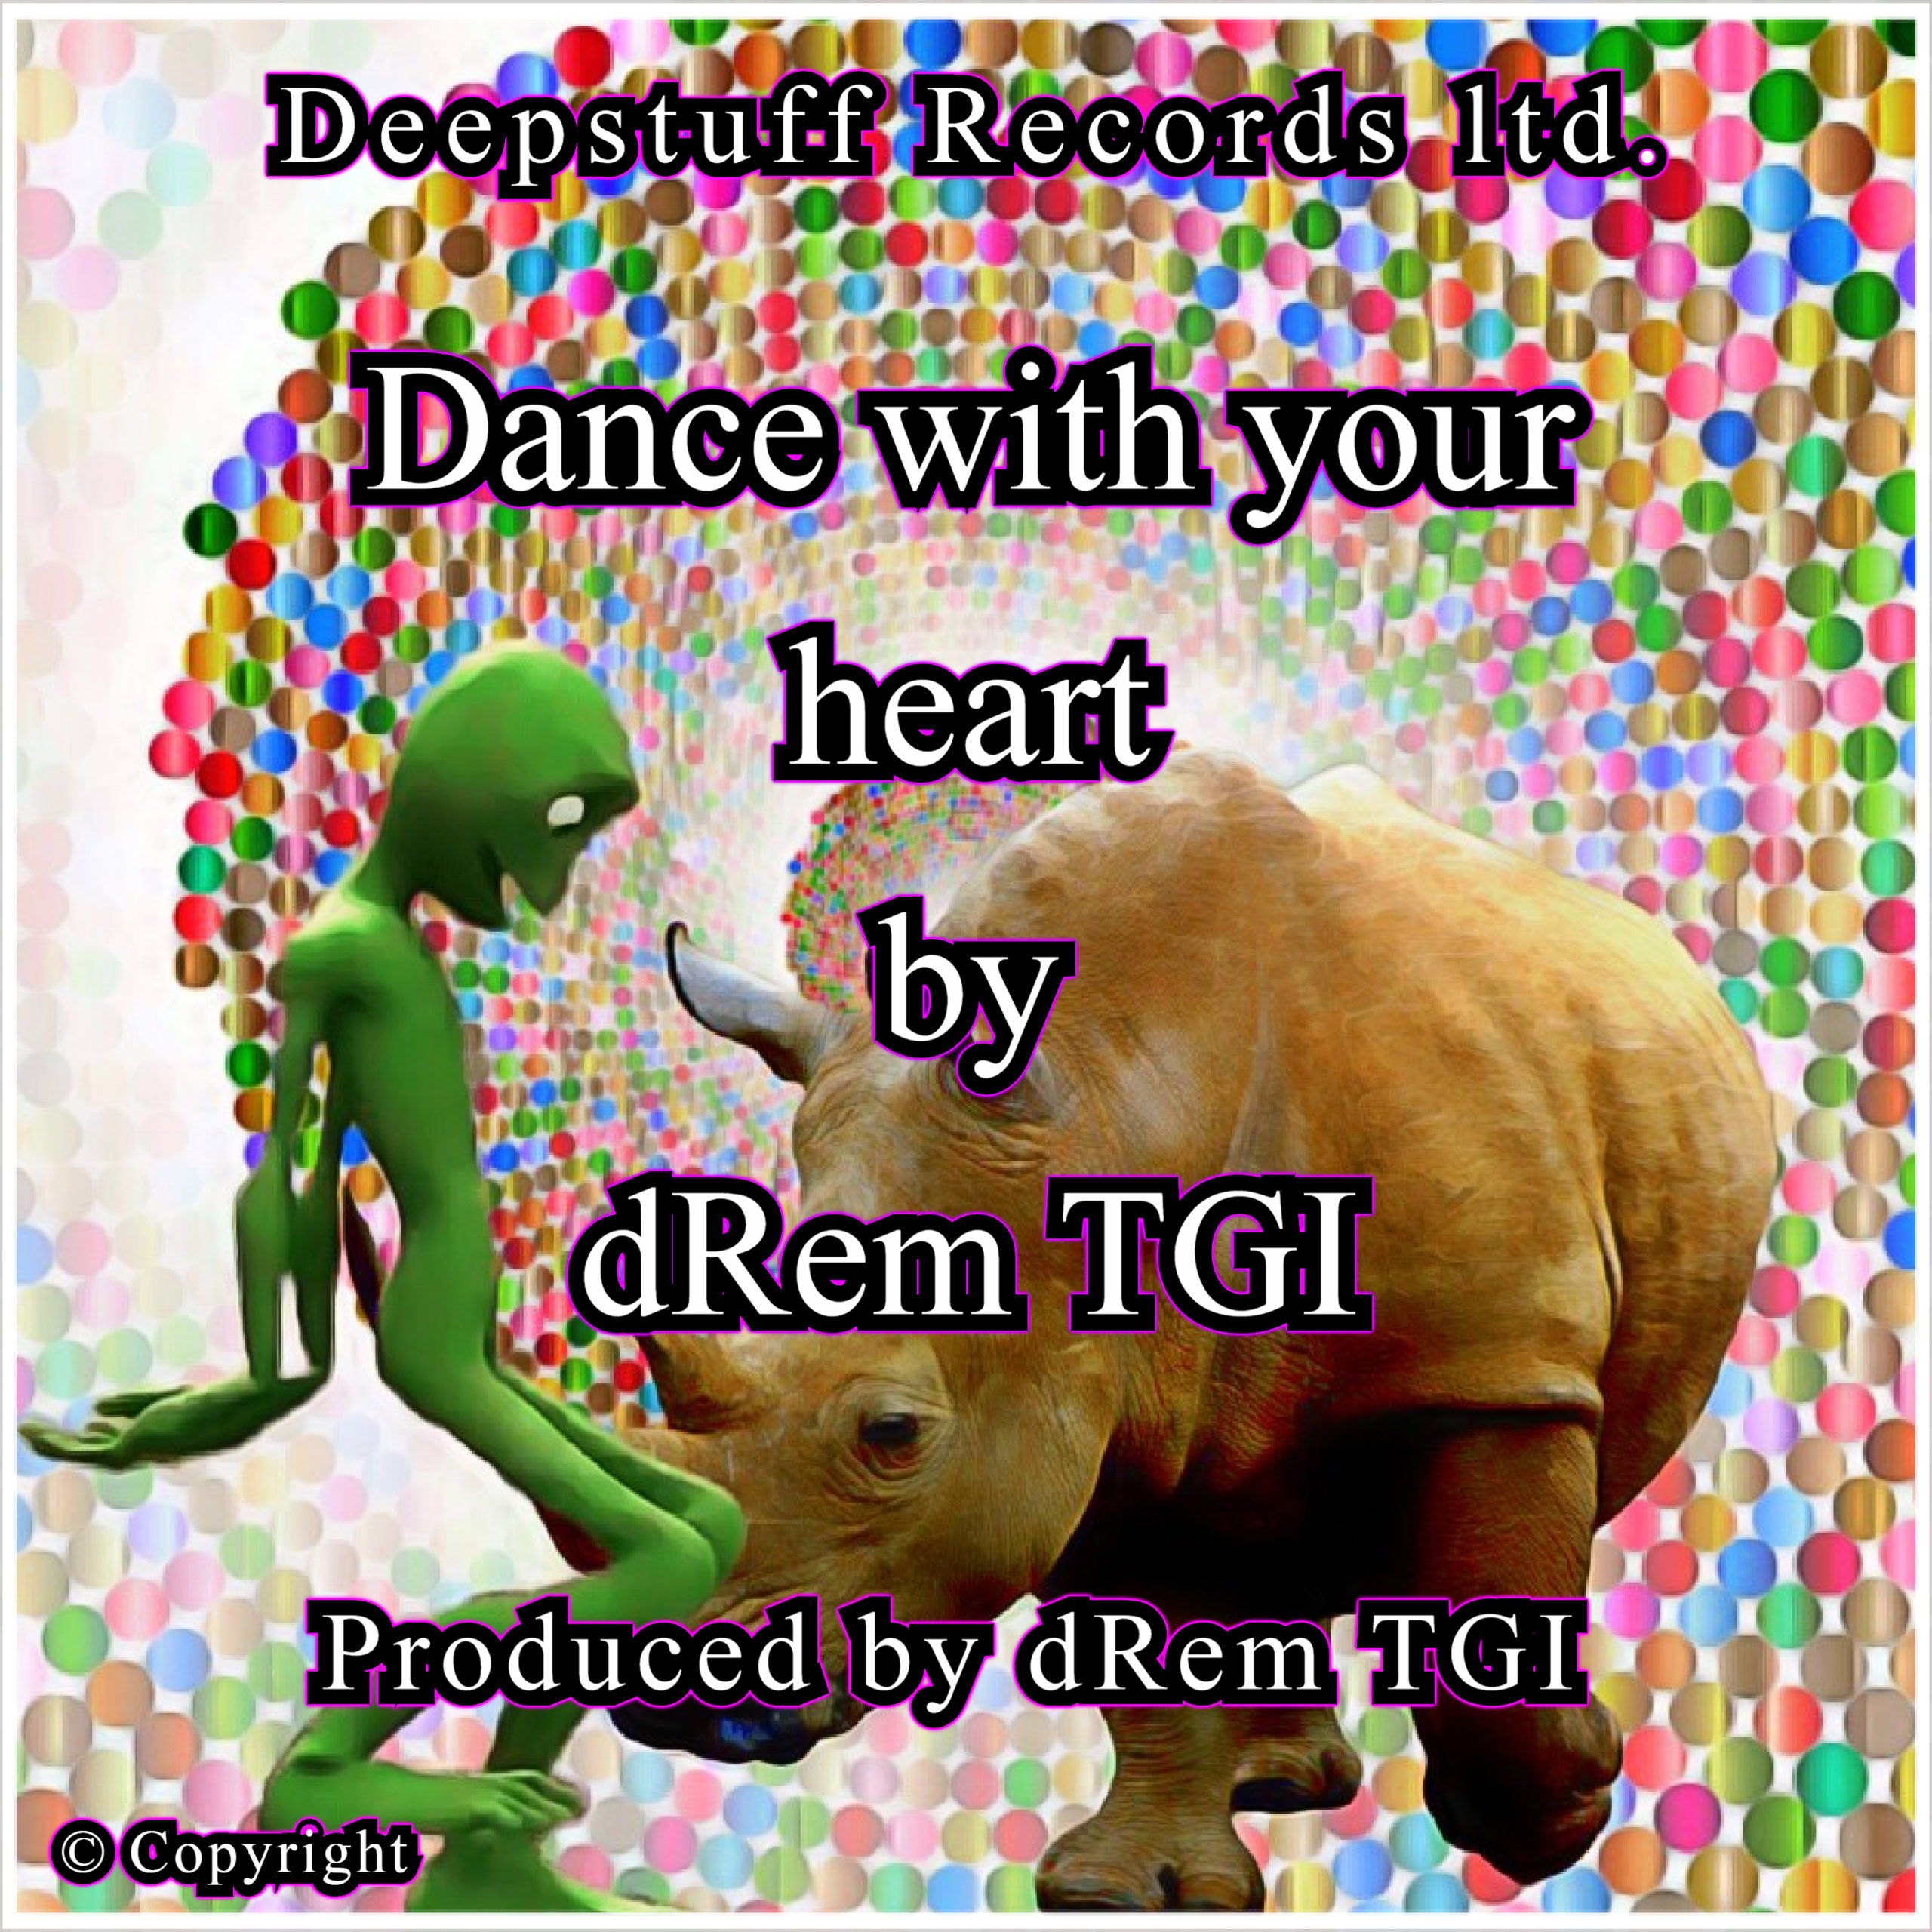 Dance with your heart